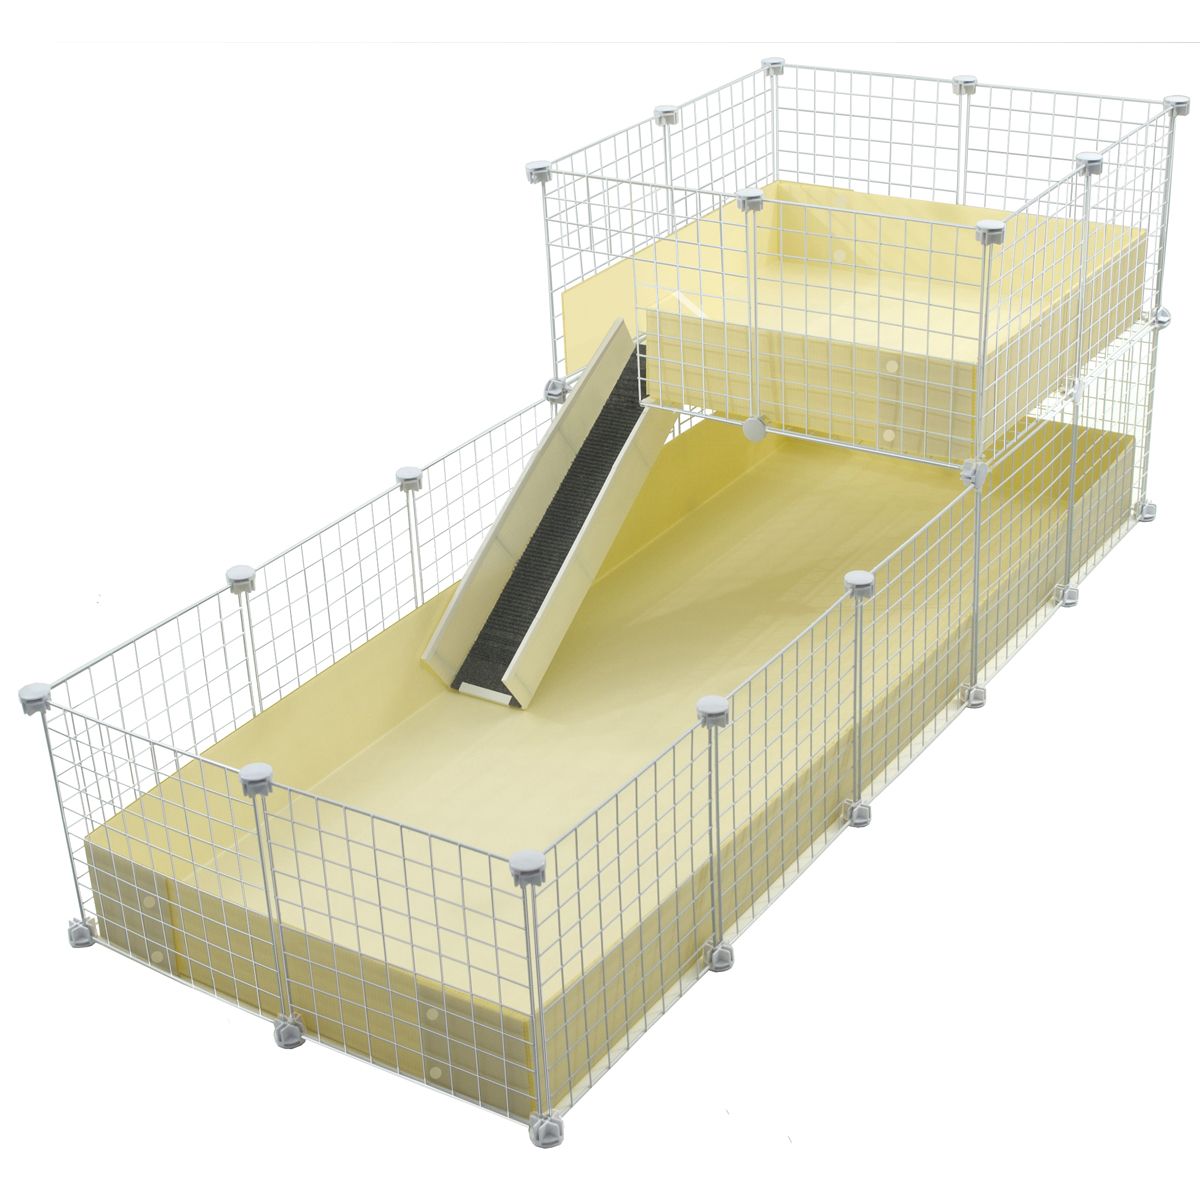 XL (2x5 Grids) / WIDE Loft - Deluxe Cages - Cagetopia